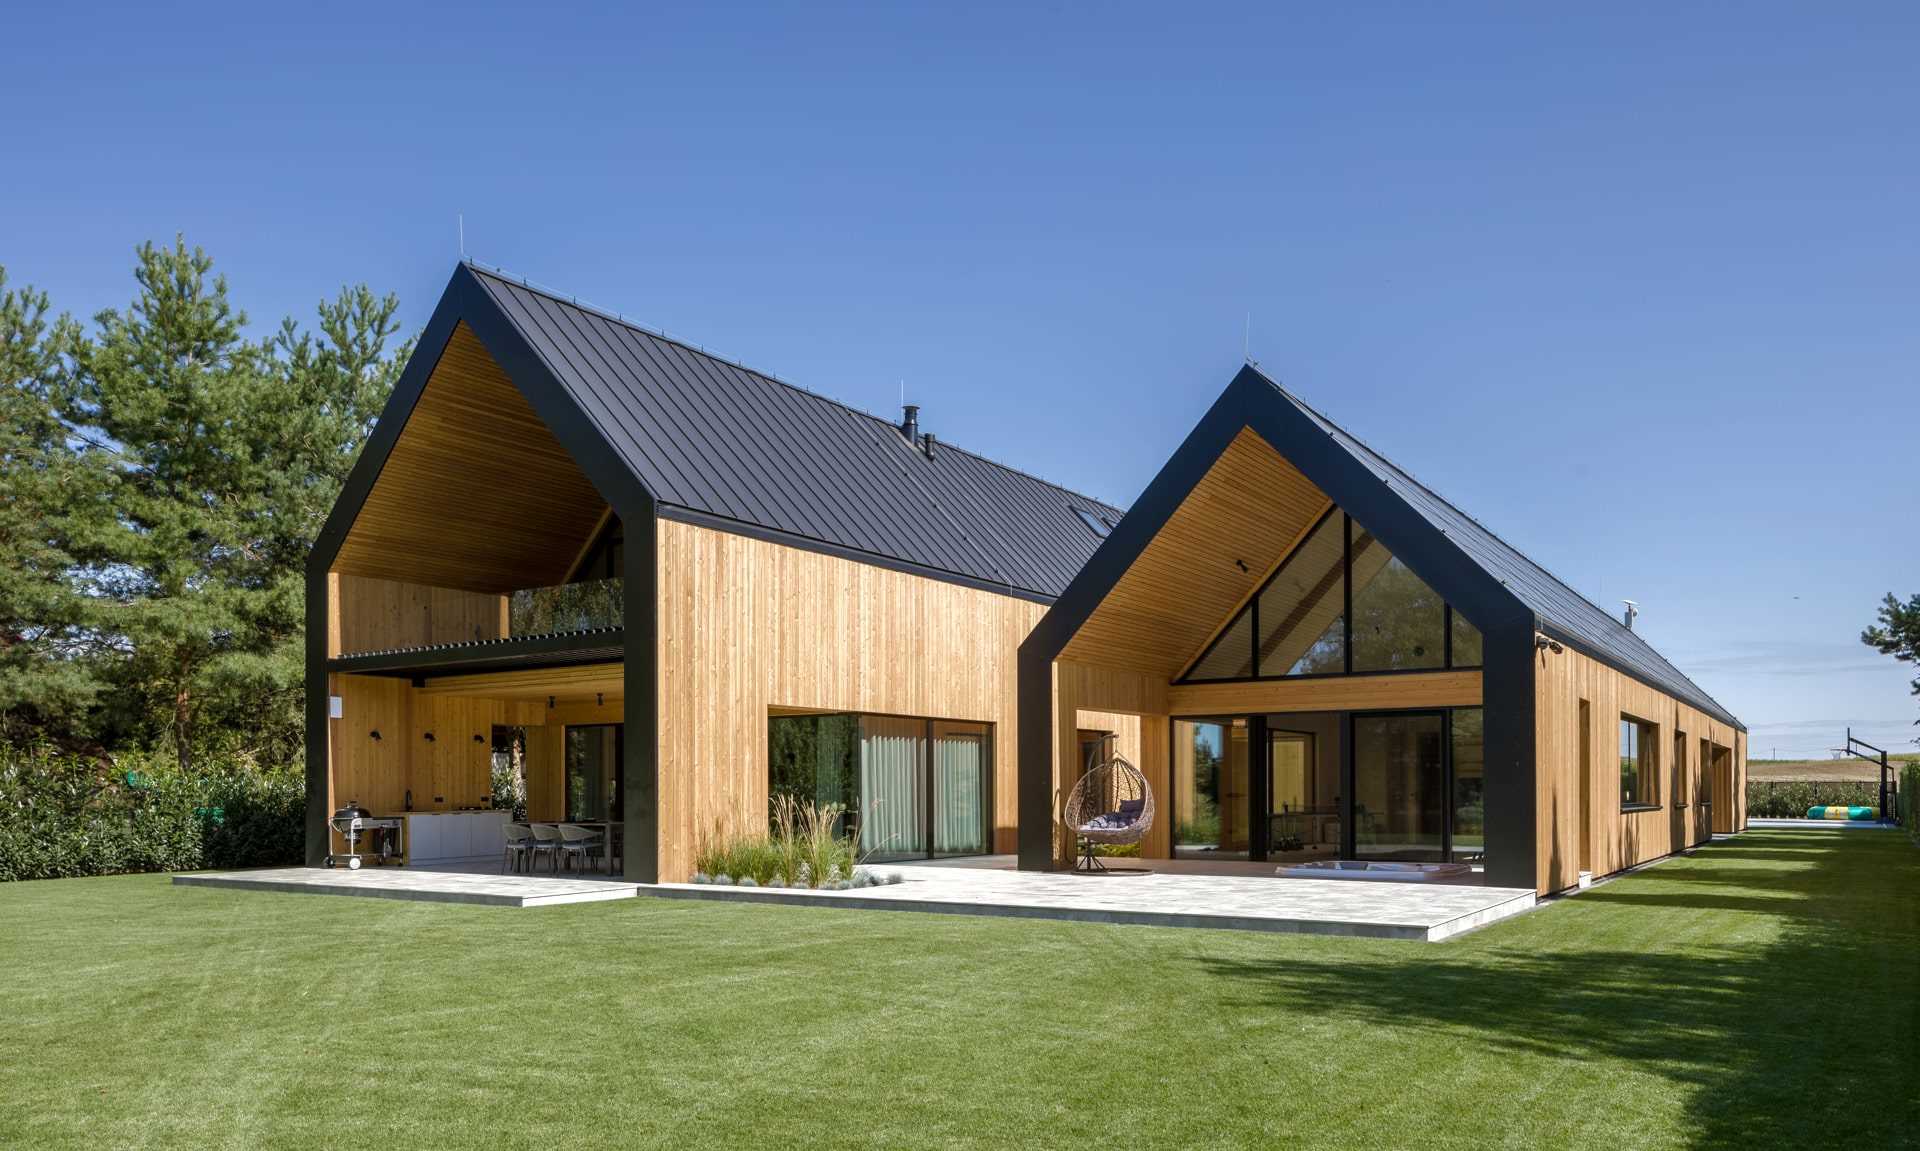 A modern house that has a layout similar to two barns positioned side-by-side.